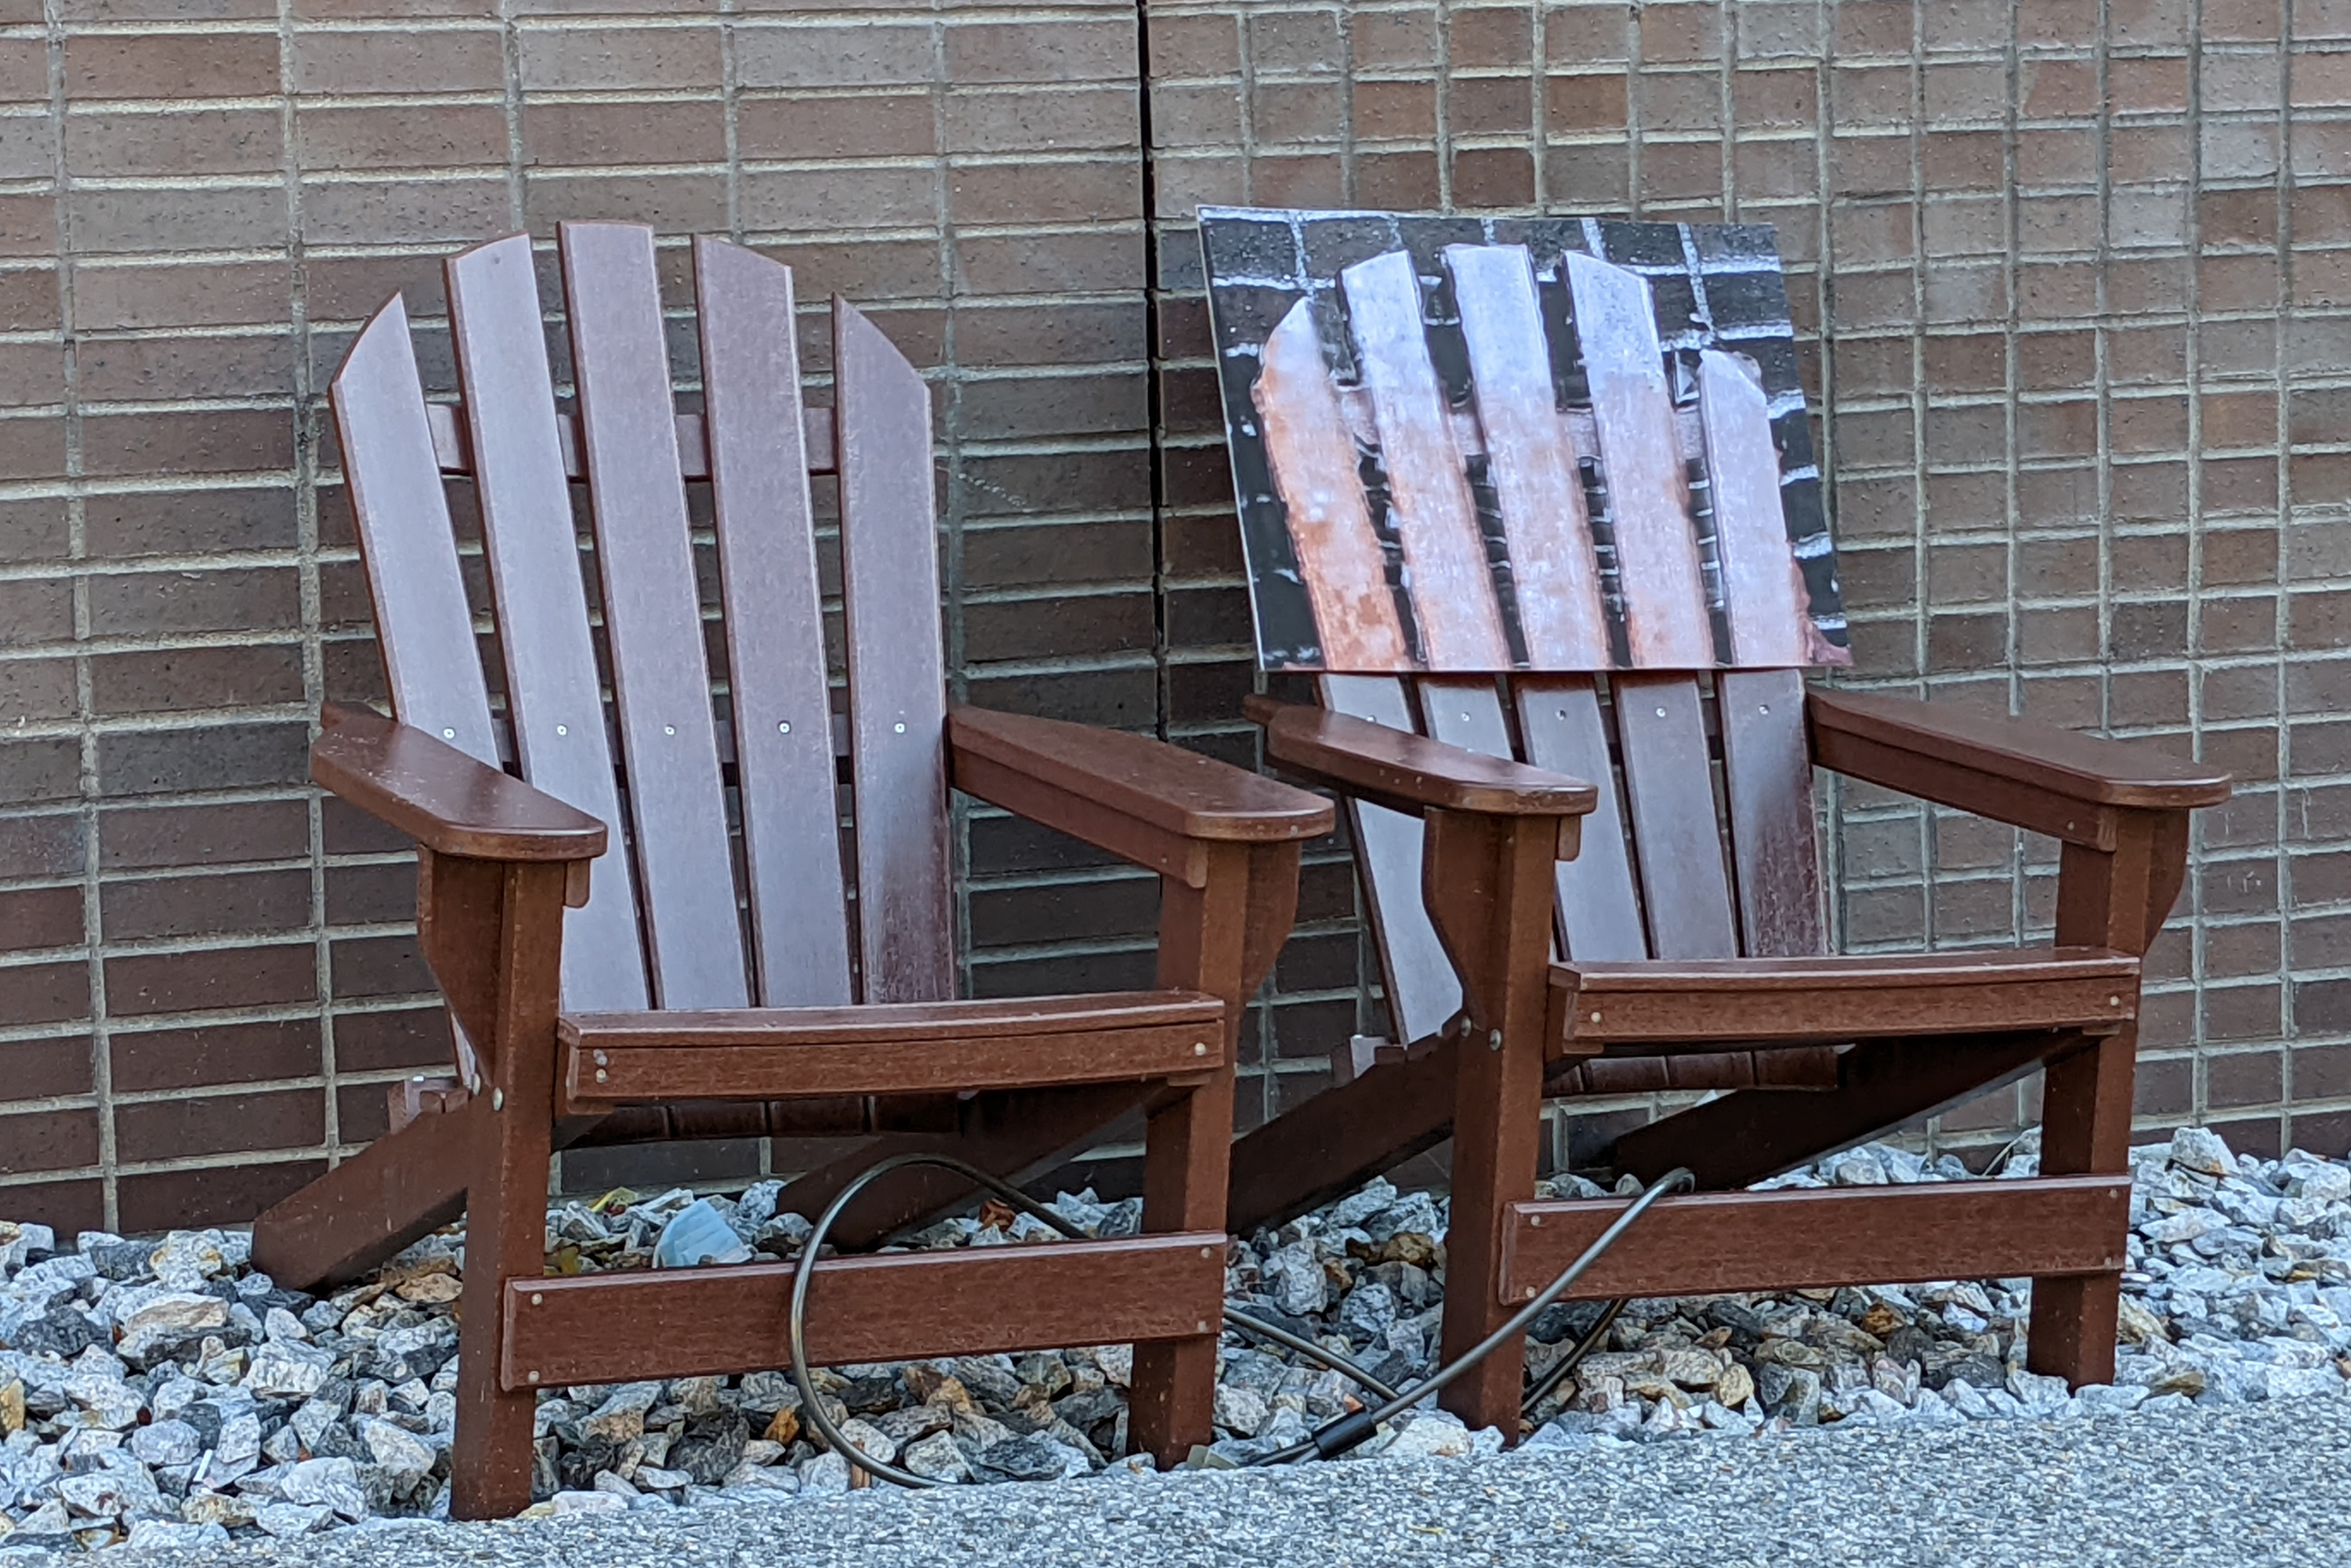 photogrammetric image of two chairs